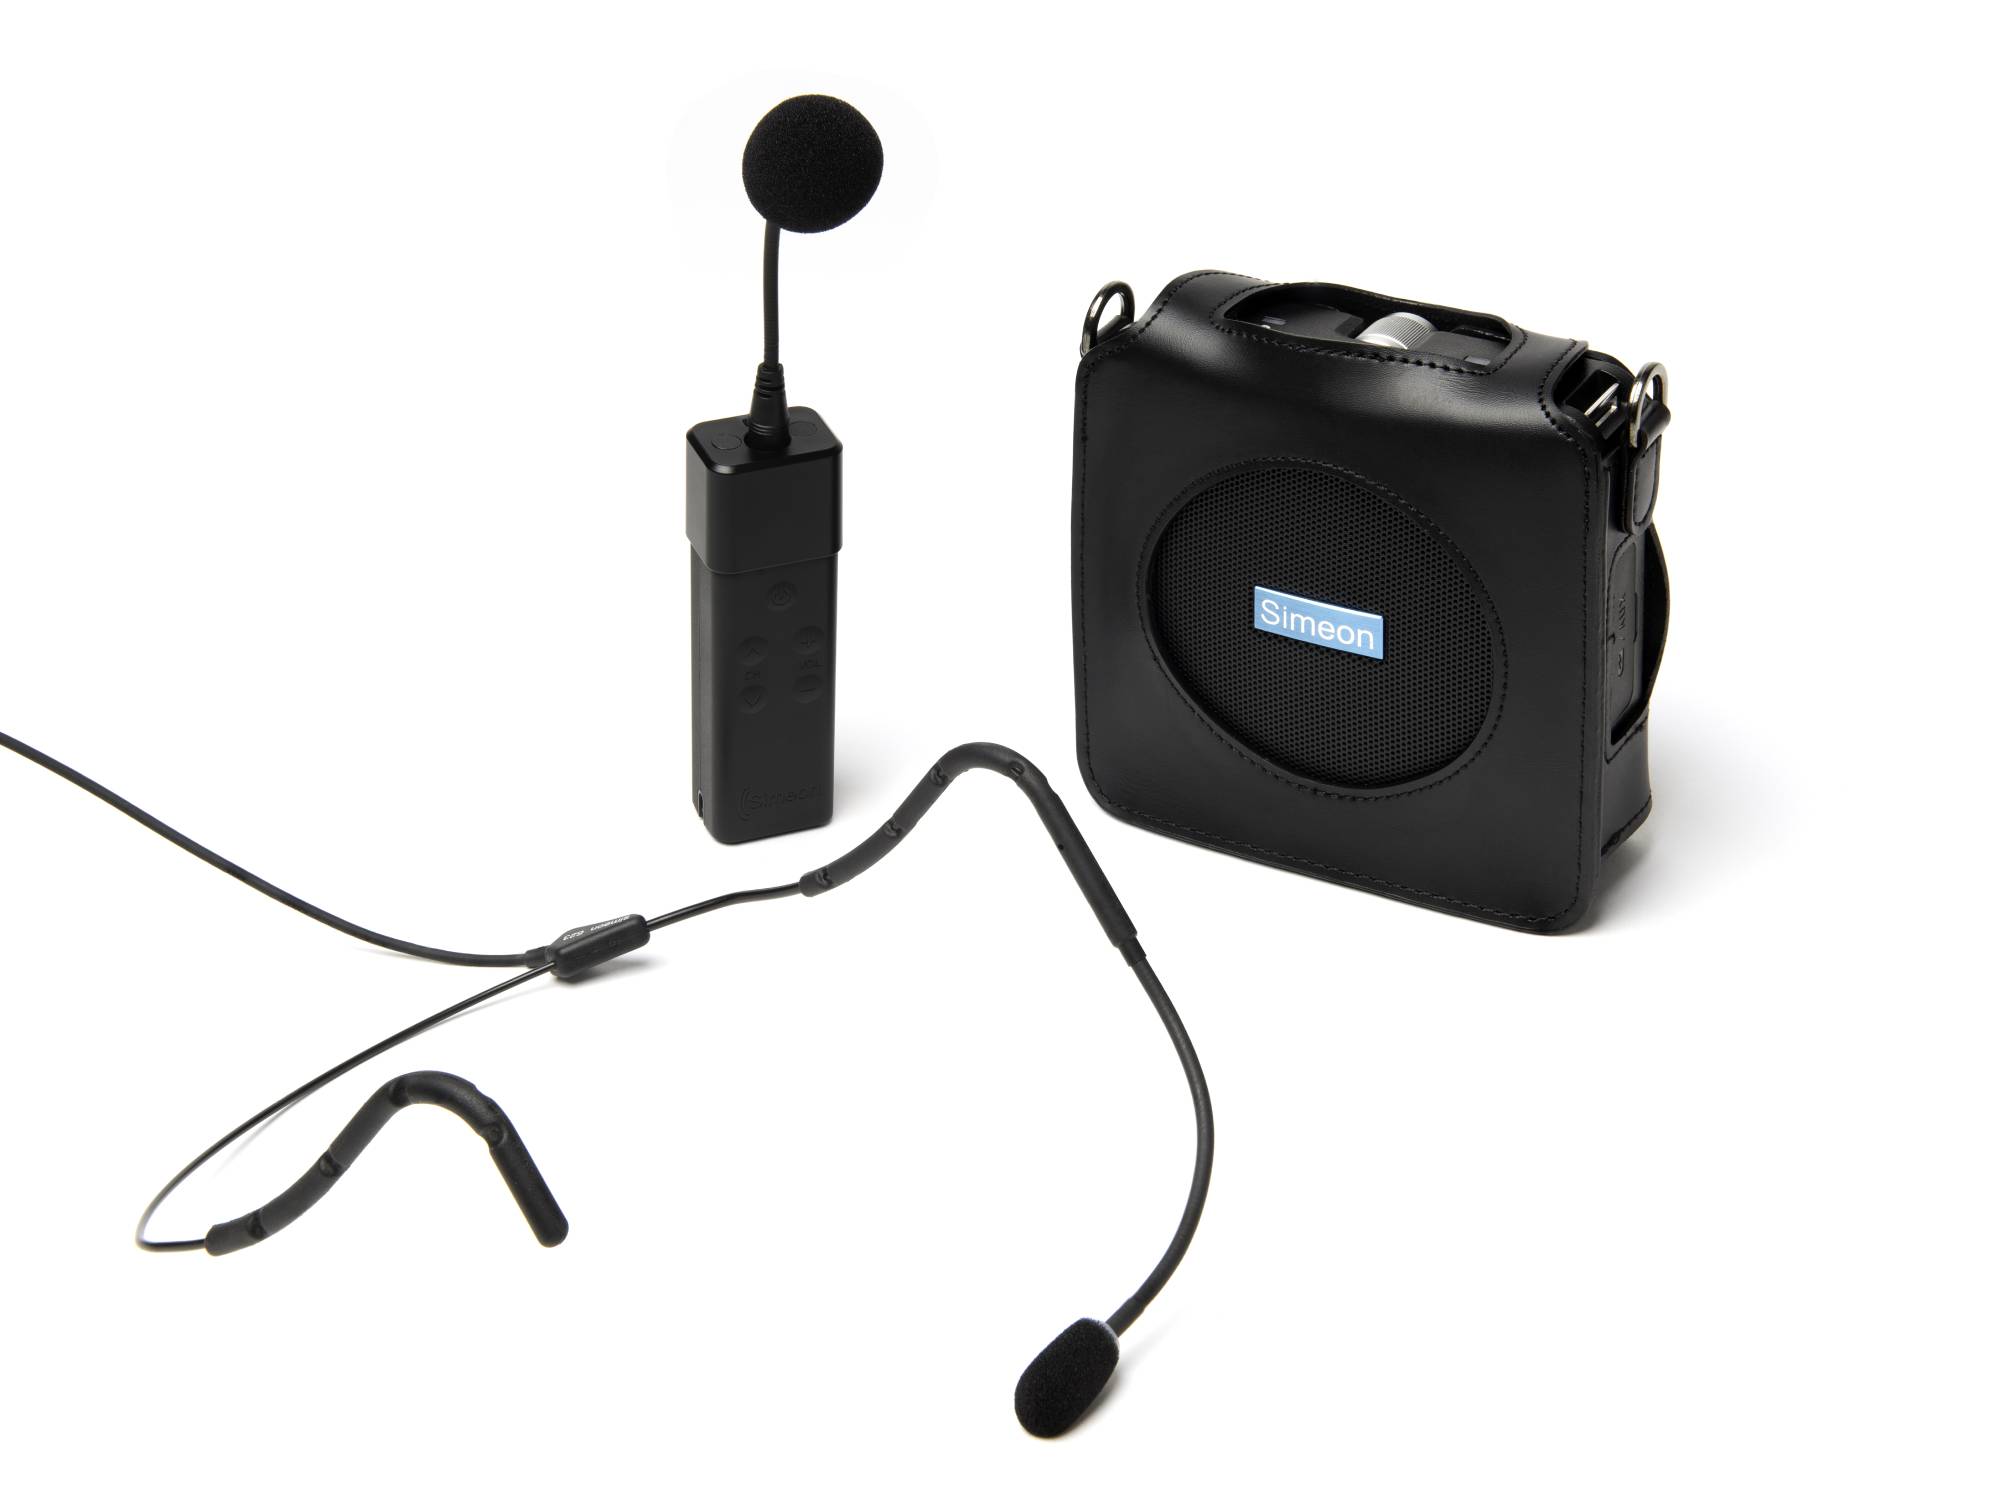 Simeon Sprek Voice Amplifer - prevent vocal fatigue, damage to vocal chords or voice. Comes with High-Speed Portable USB Charge.